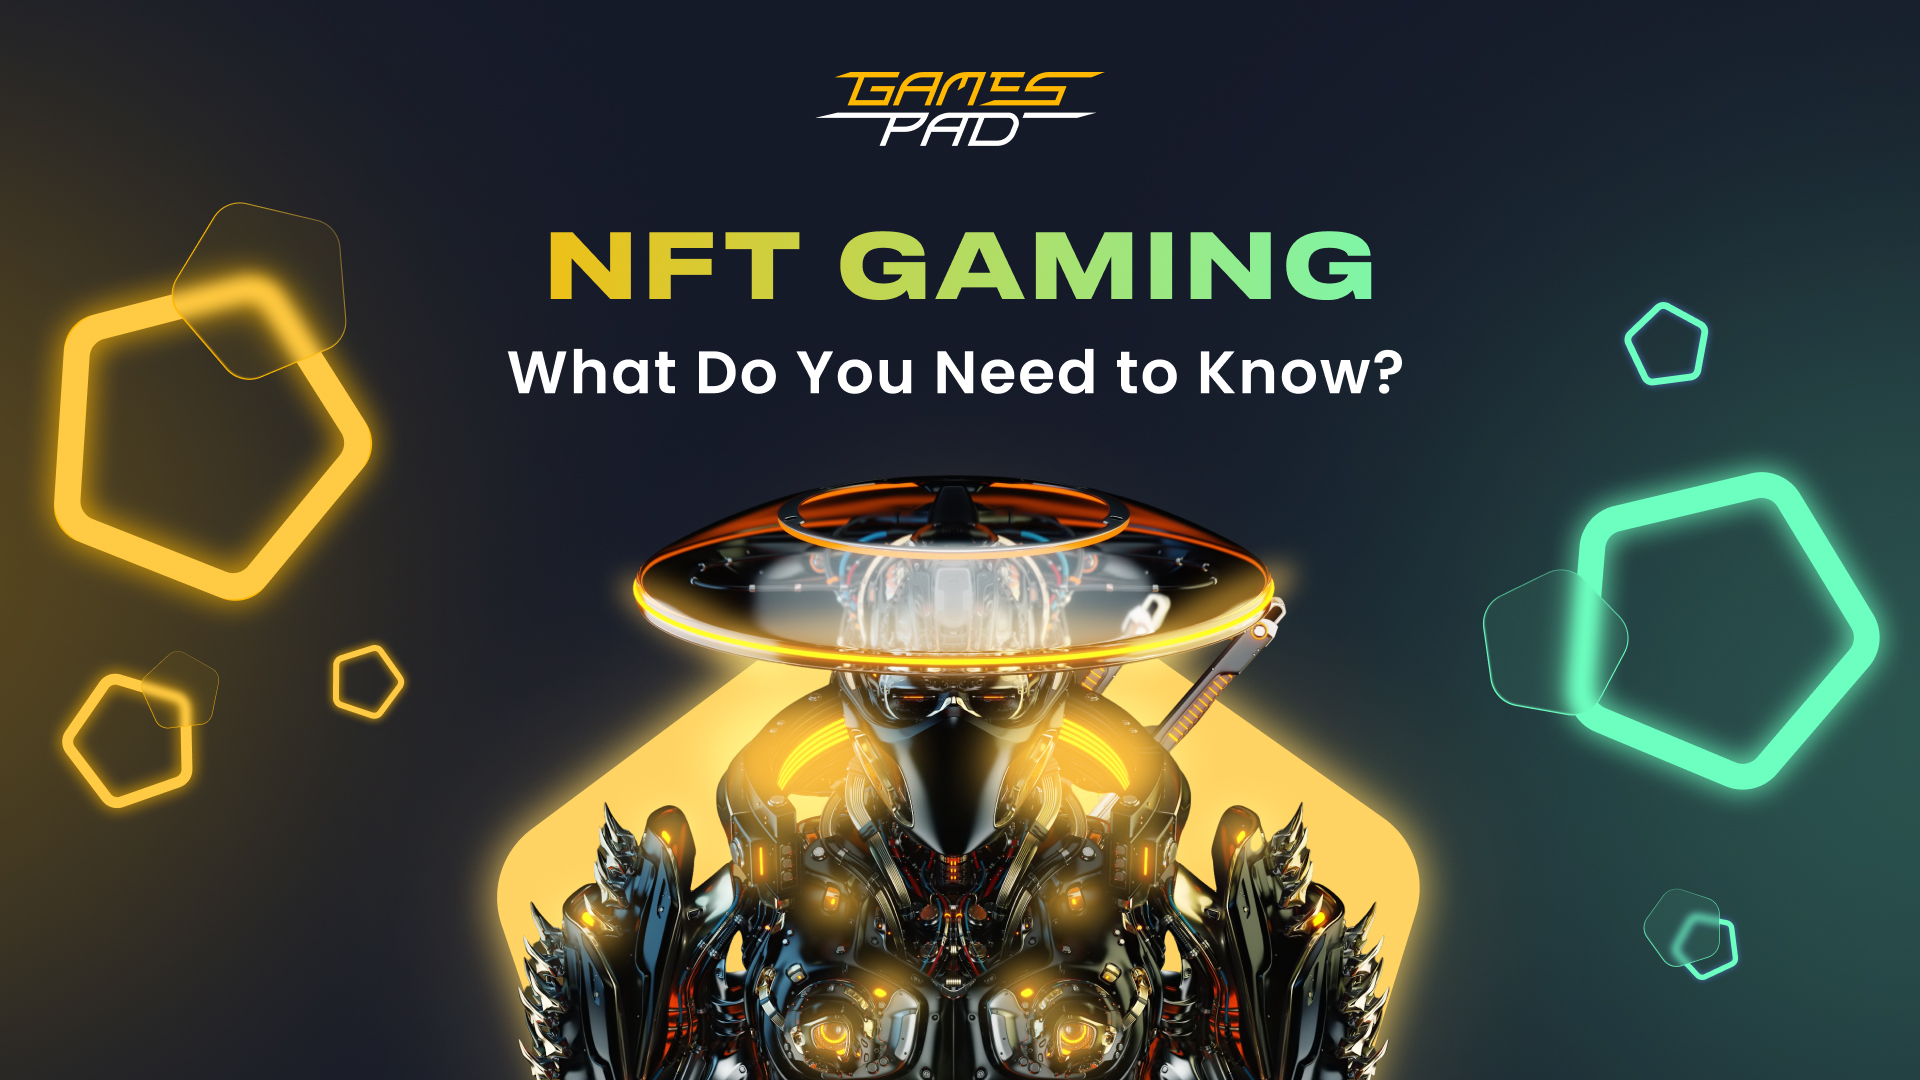 NFT Gaming. What Do You Need to Know?